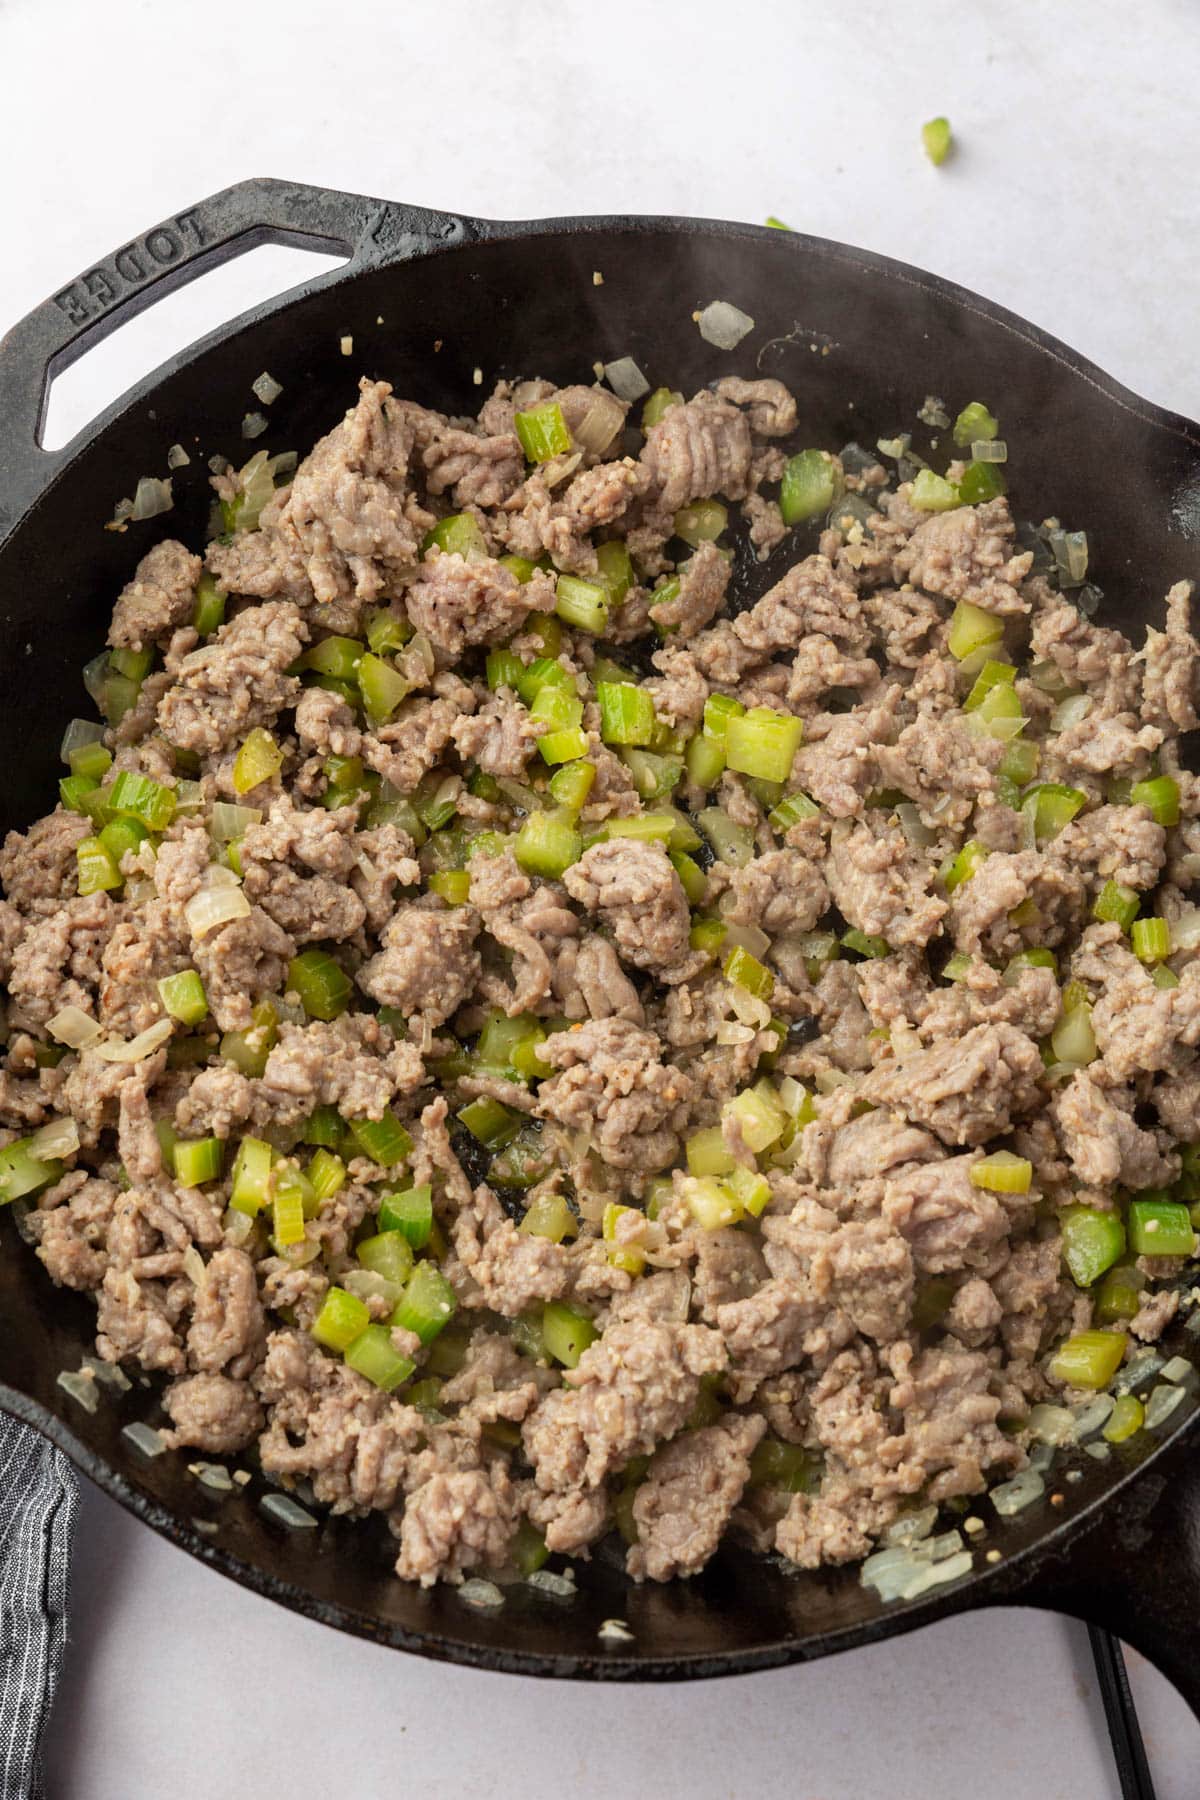 Cooked Italian sausage, onions, and celery mixed together in a cast iron skillet.